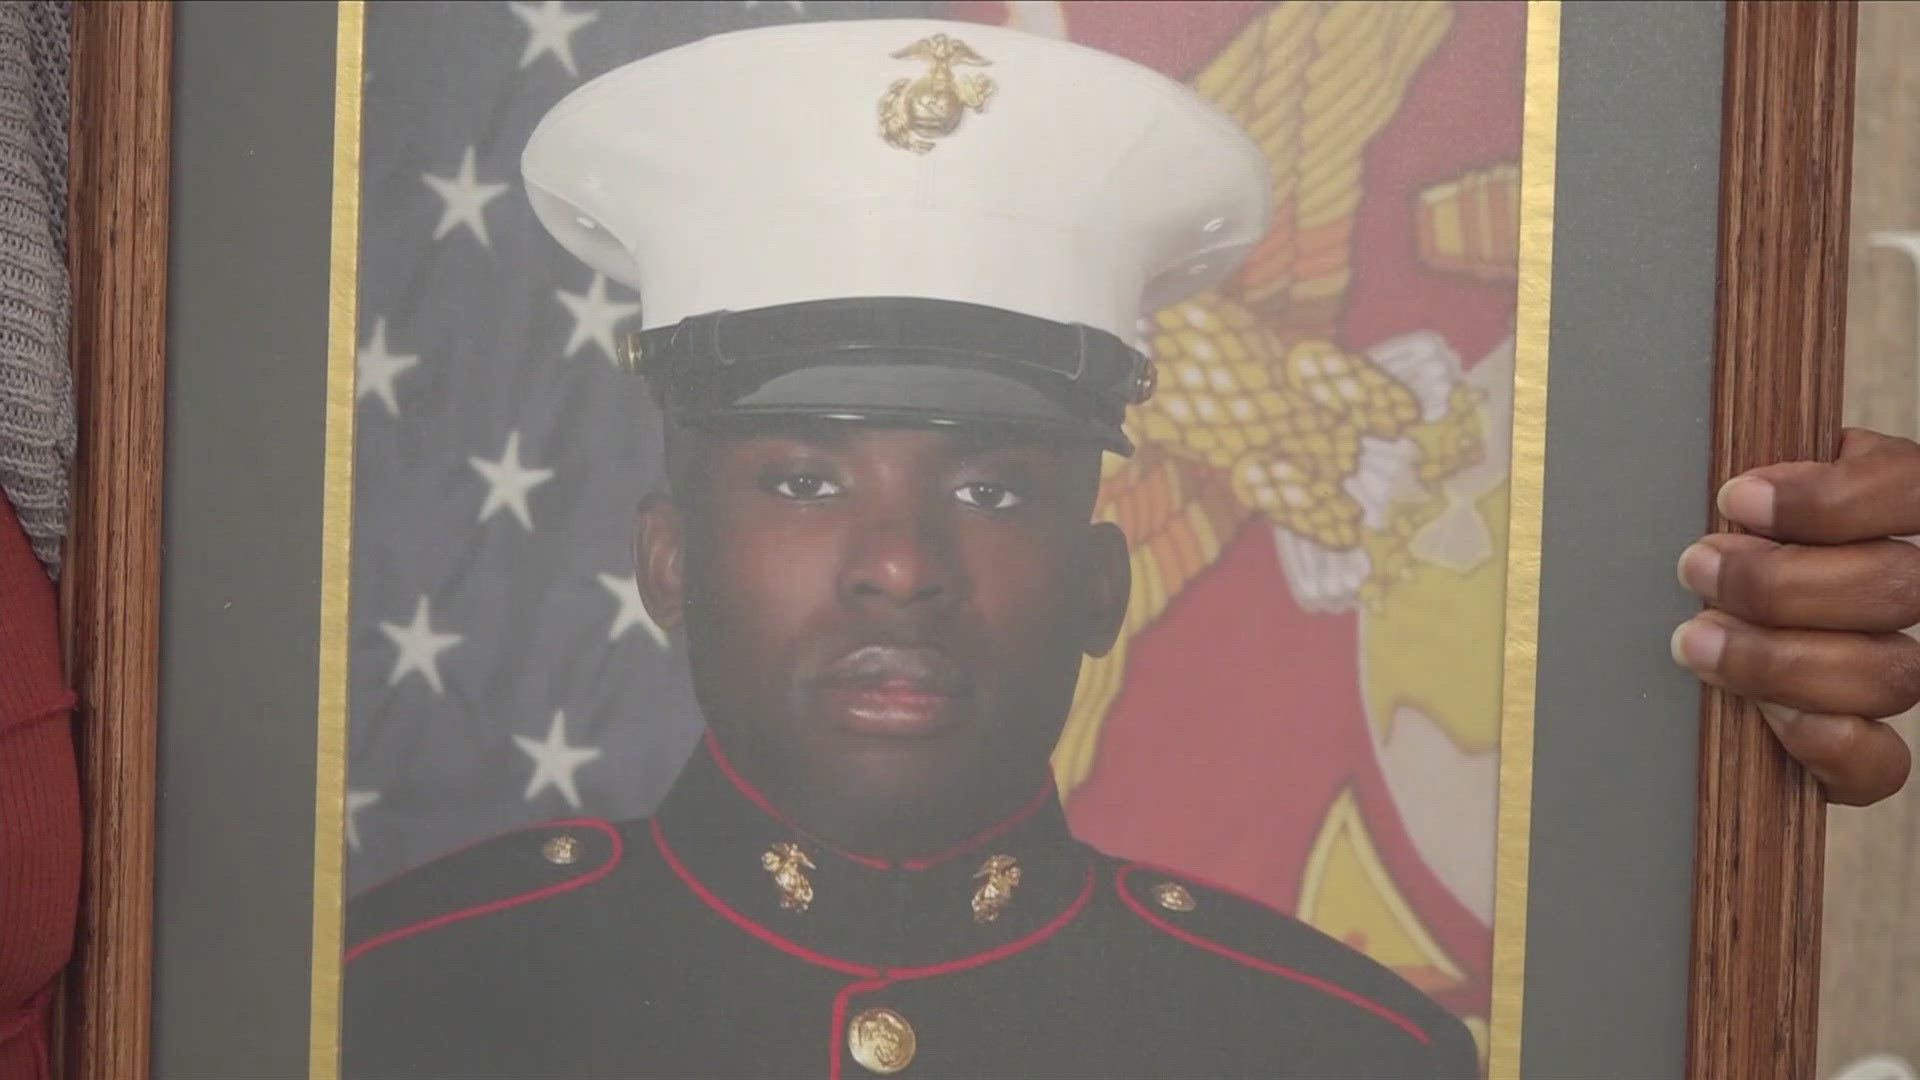 19-year-old Kavian Elder was last seen on May 3. Elder was completing the last phase of his training for the U.S. Marine Corps at Ft. Leonard Wood.